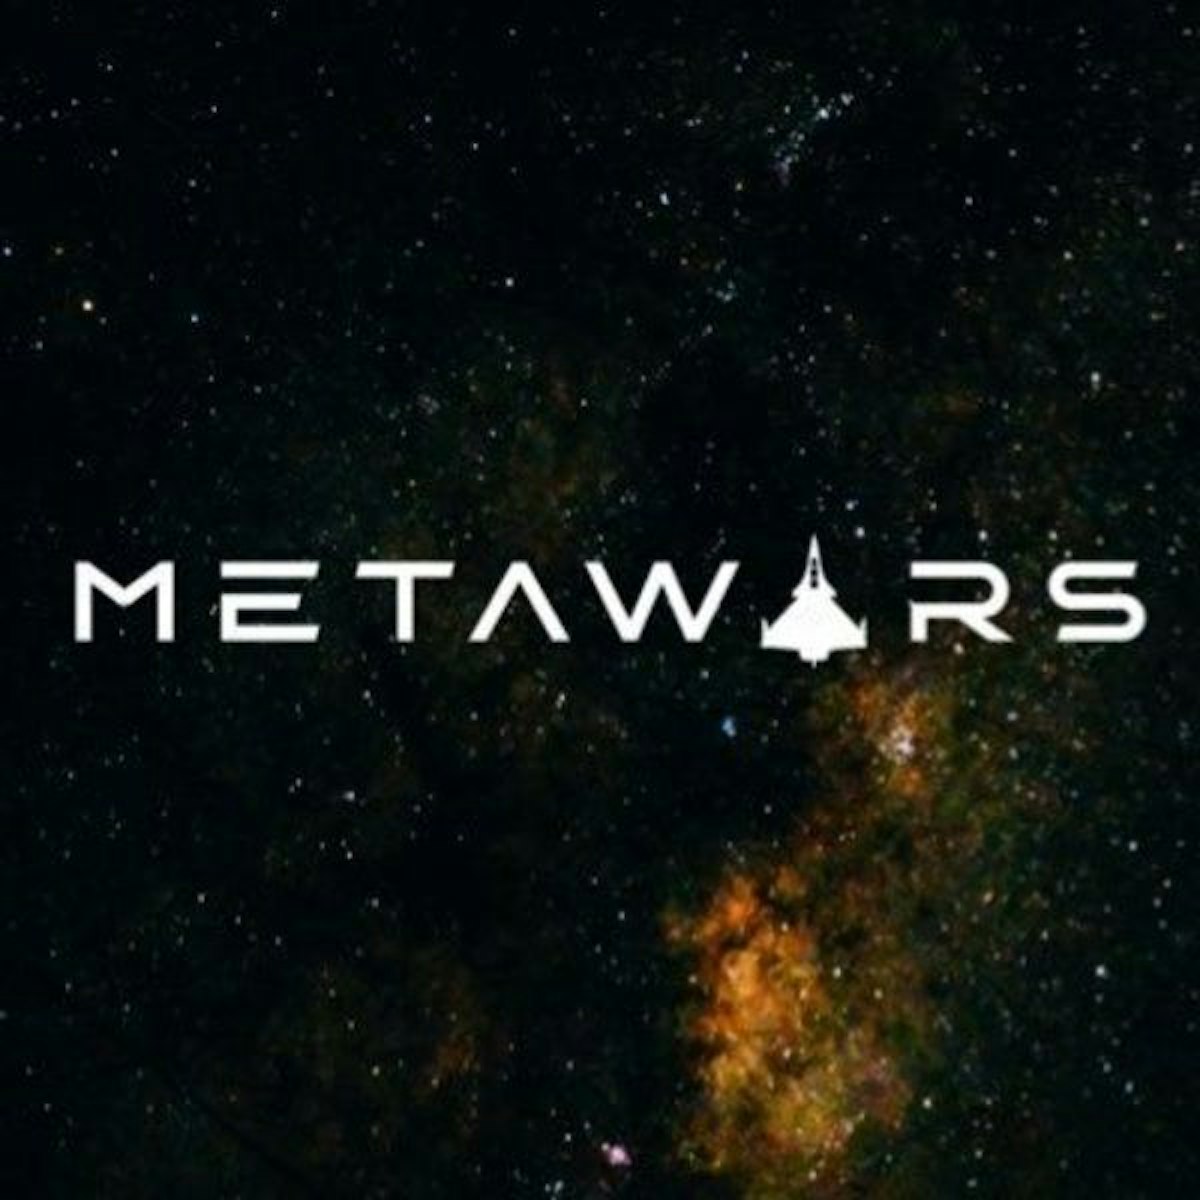 featured image - Metawars is A Strategic Blockchain Game in the Metaverse